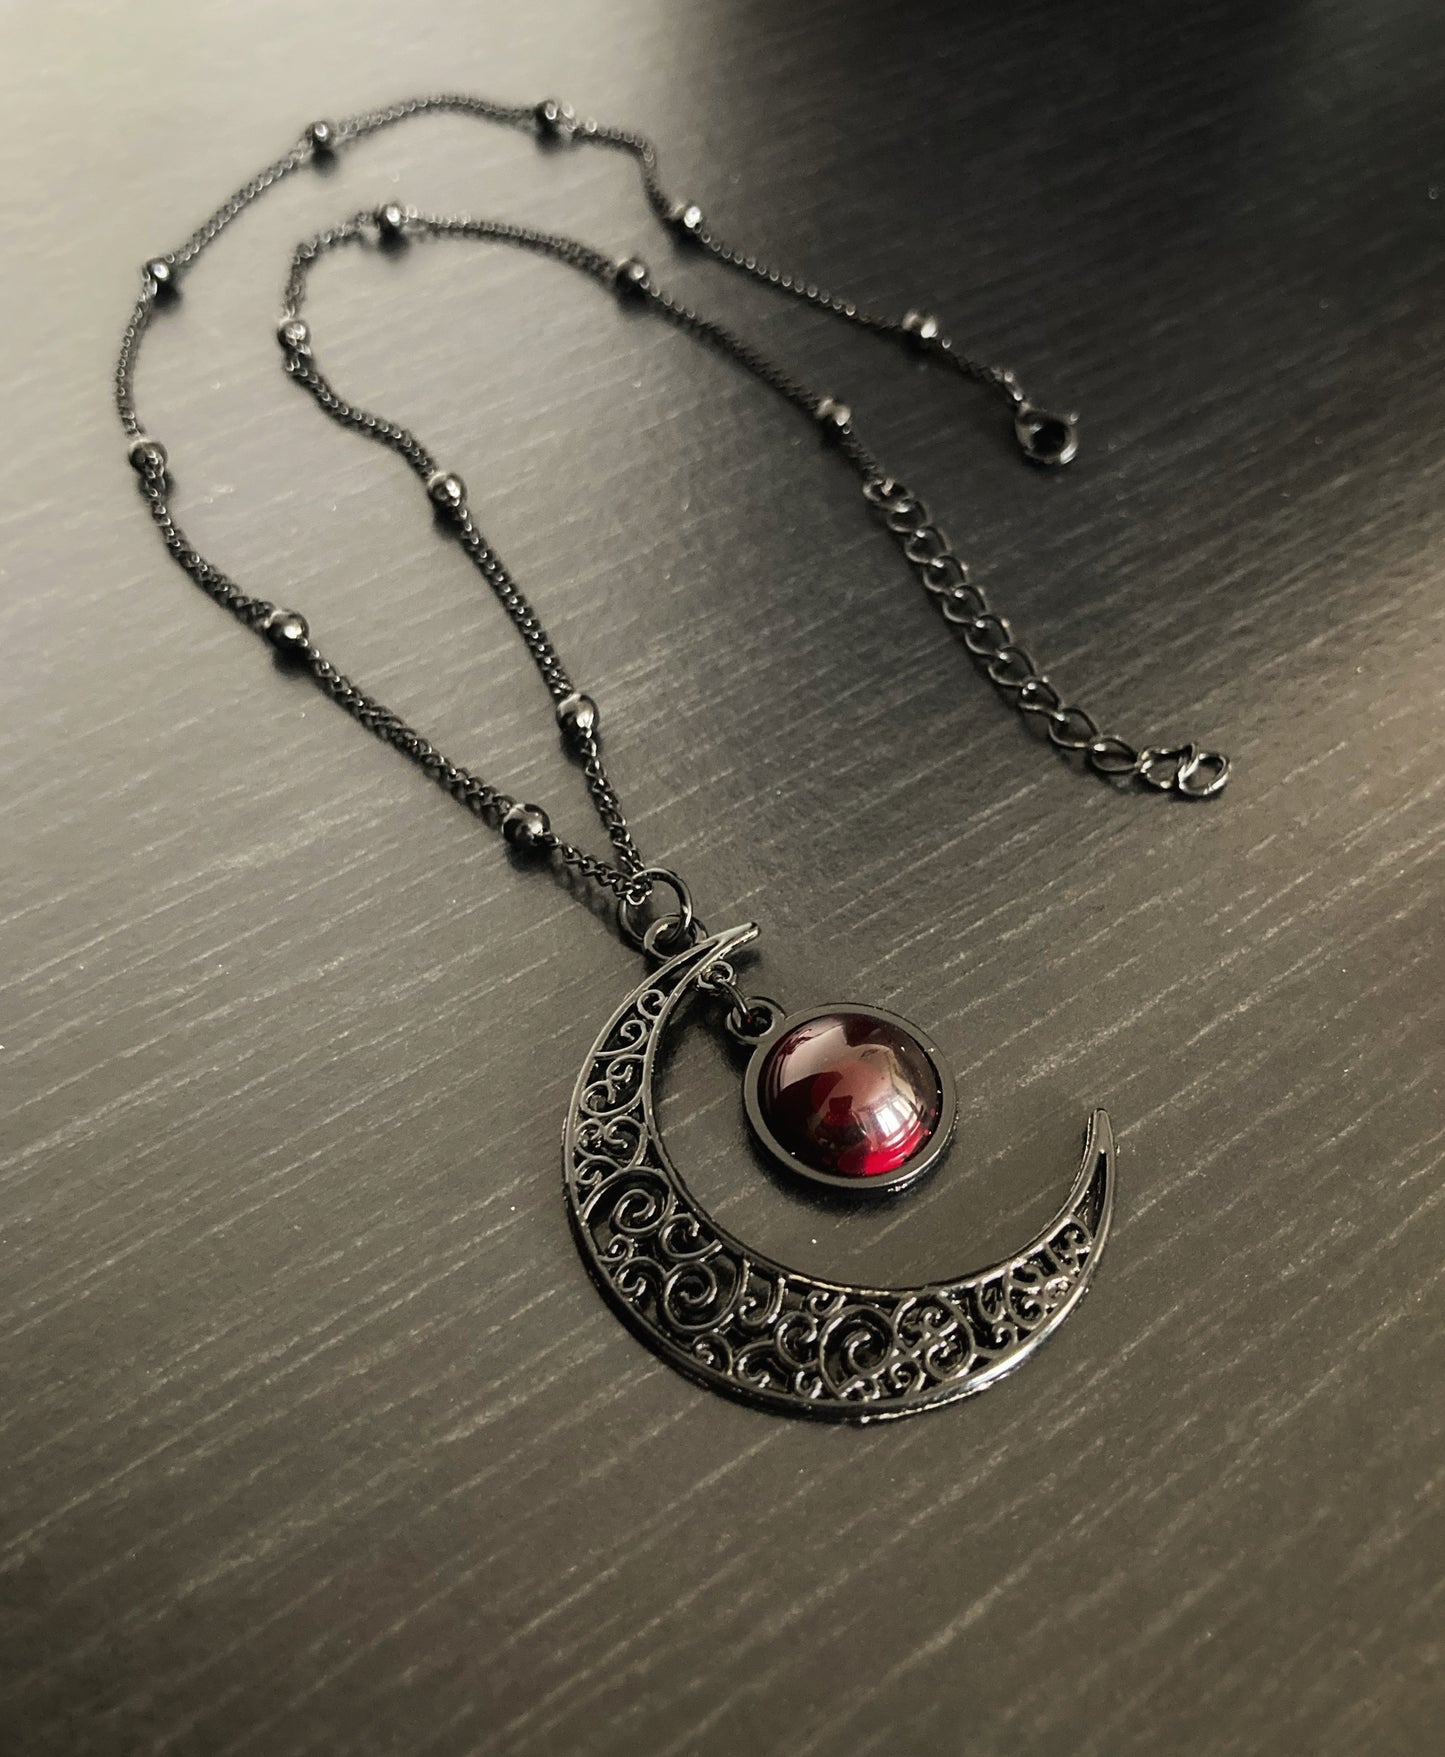 A full view of a black necklace with crescent moon pendant. You can see the metal clasp that fastens the item and periodically there are small ball shapes all along the chain.